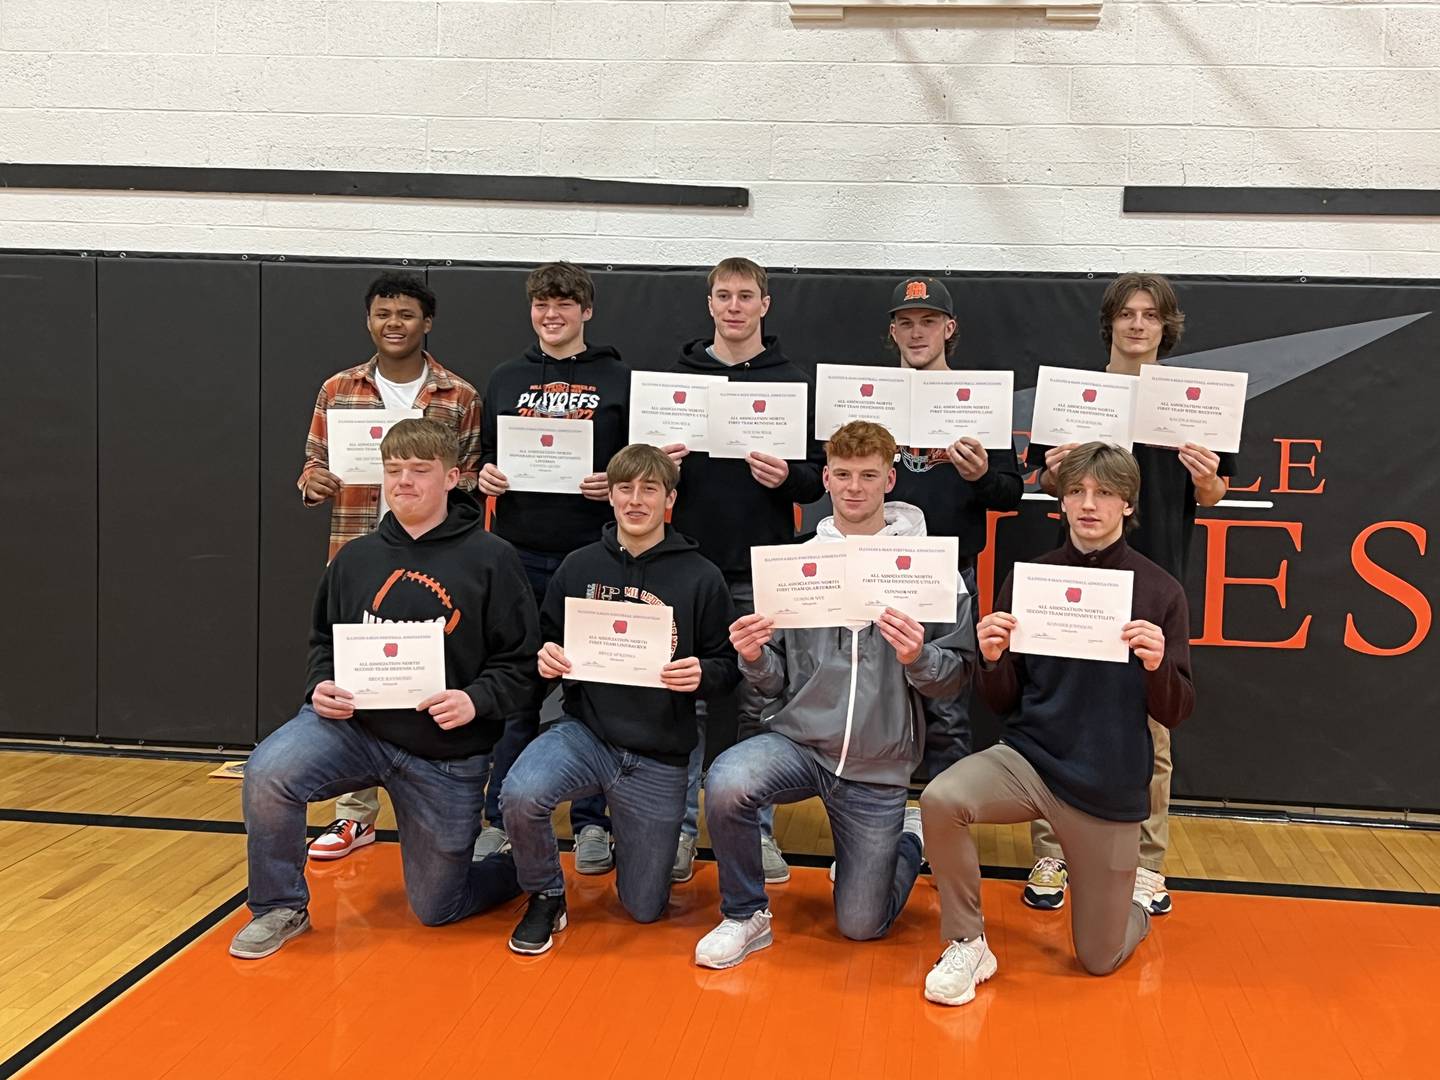 Illinois 8 Man Football All Association selections for Milledgeville are pictured here. In the front row, left to right, are: Bruce Raymond, Bryce McKenna, Connor Nye, Konner Johnson. Back row: Micah Toms-Smith, Cayden Akers, Kolton Wilk, Eric Ebersole, and Kacen Johnson.